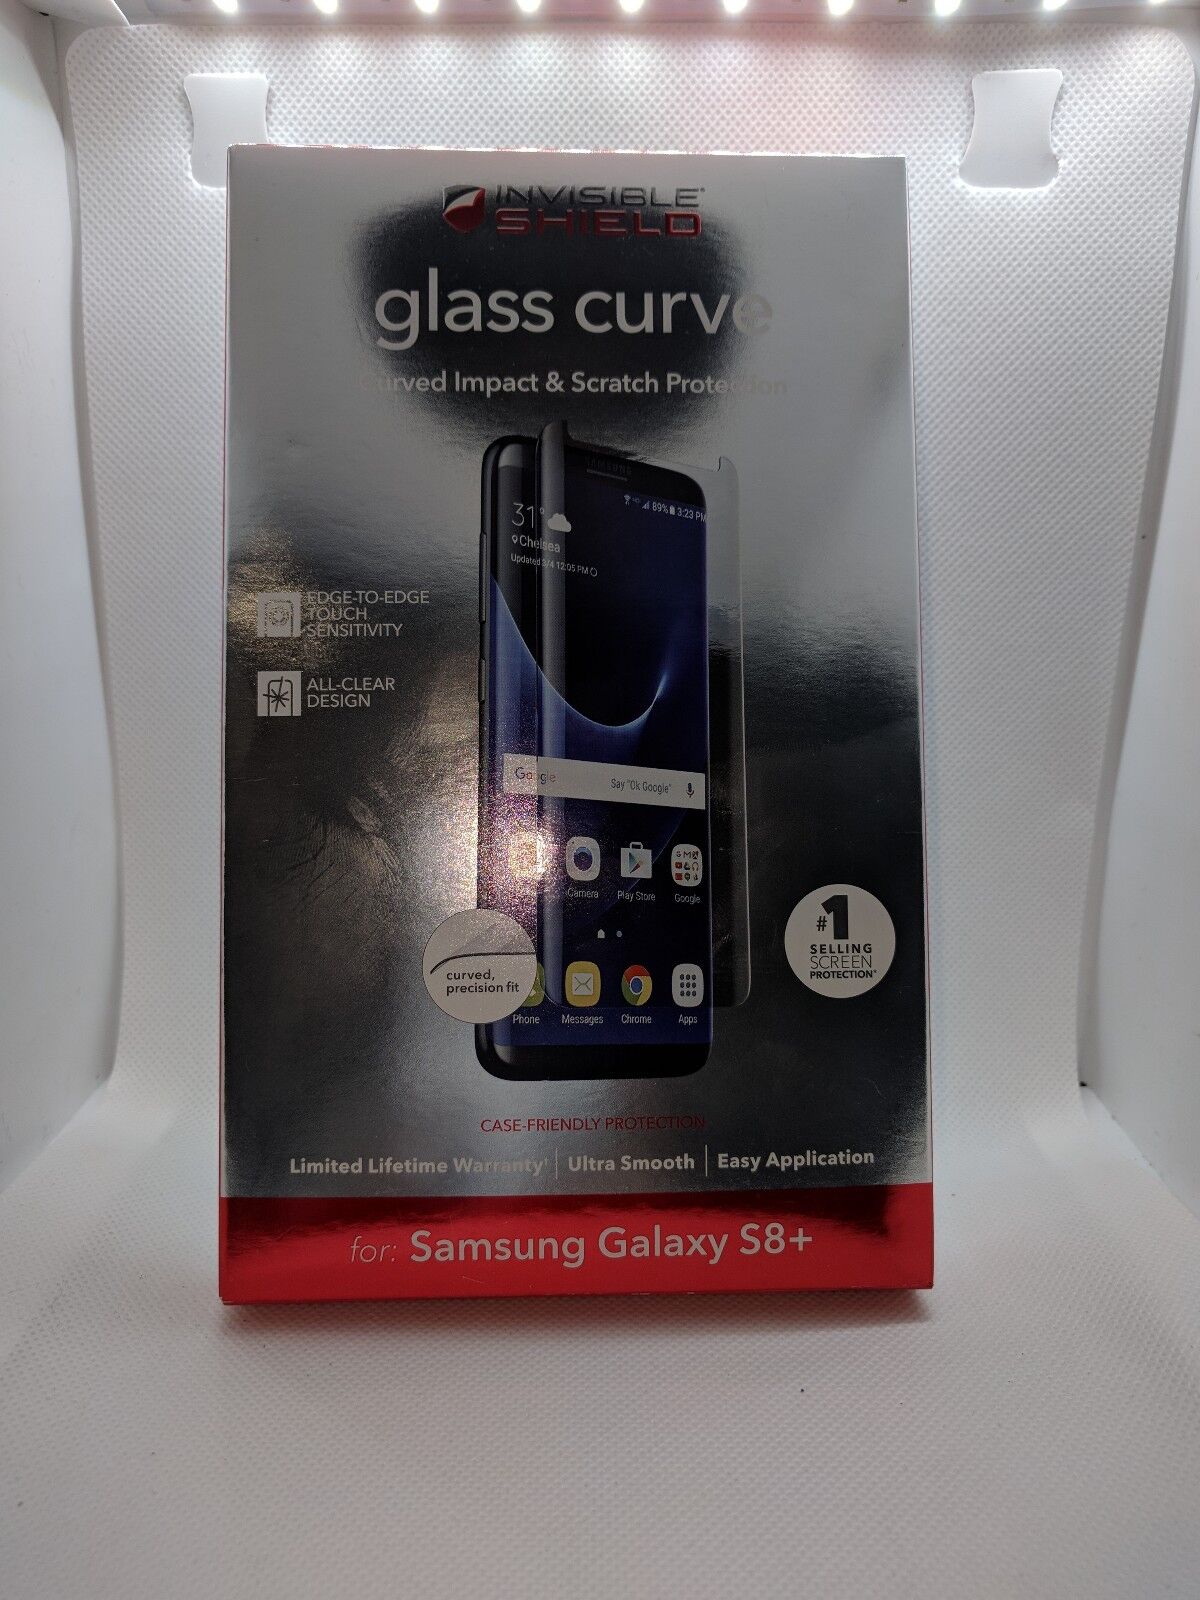 ZAGG Invisible Glass Curve Screen Protector for samsung Galaxy...